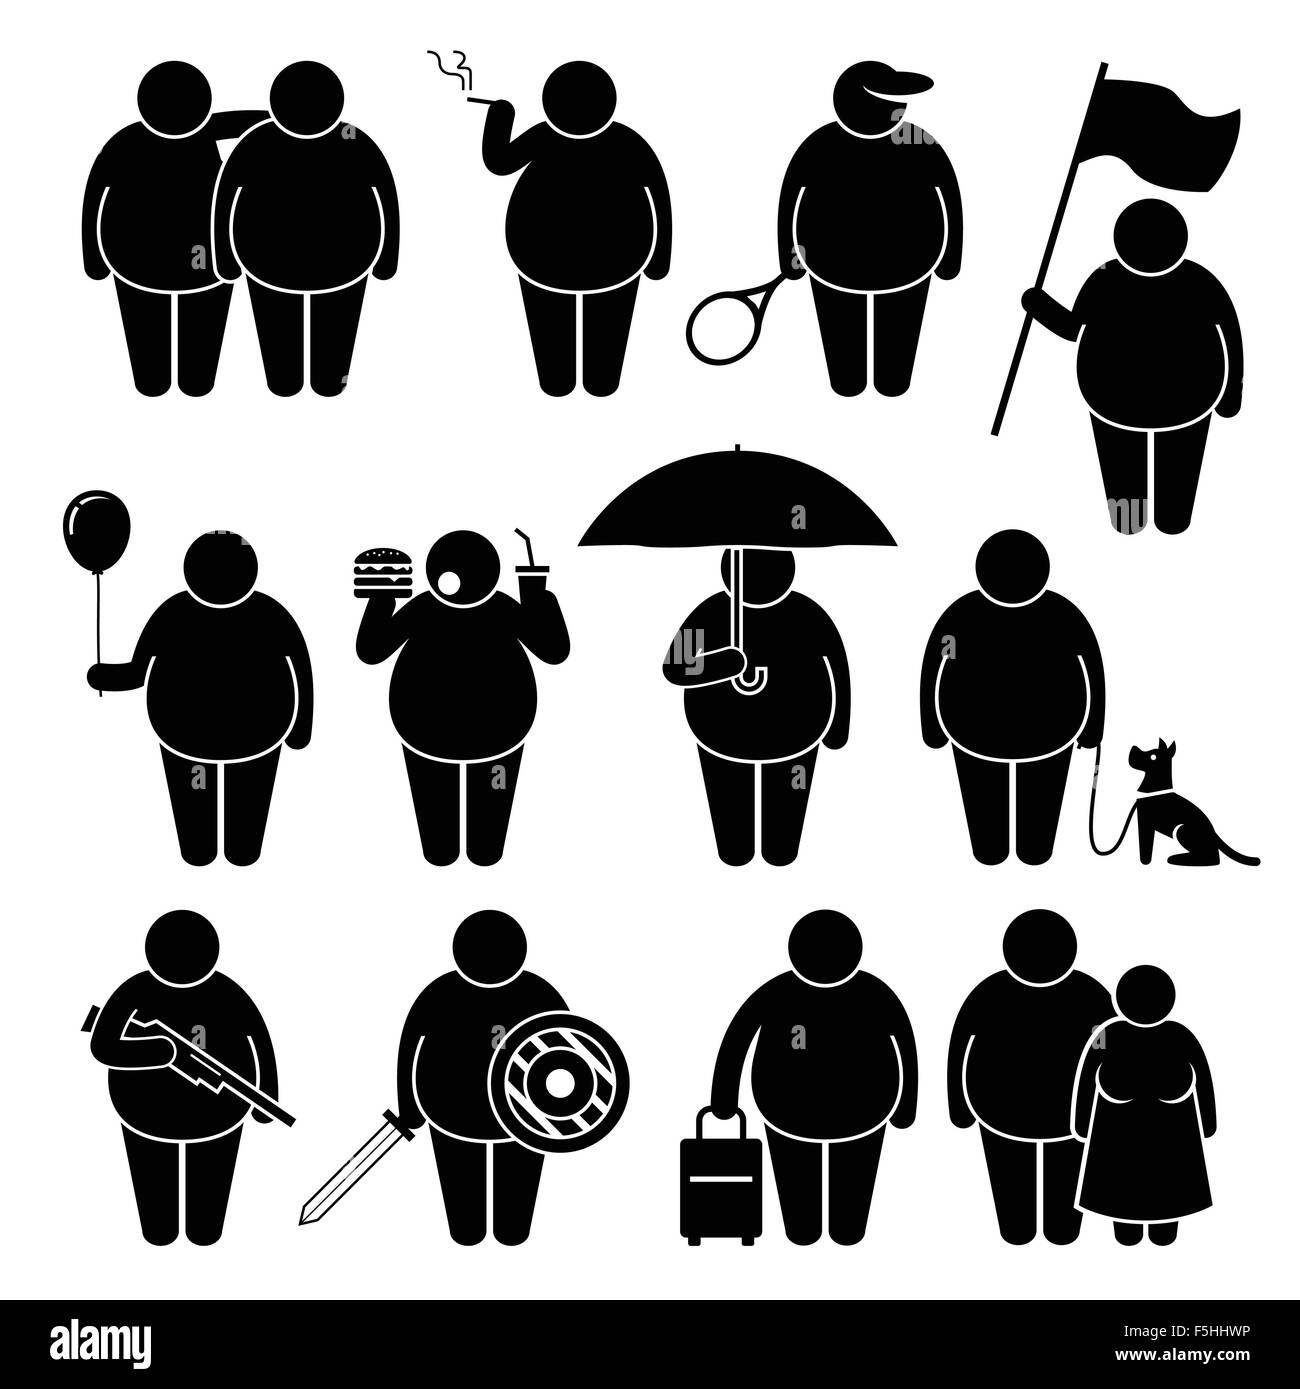 Fat Man Holding Using Various Objects Stick Figure Pictogram Icons Stock Vector